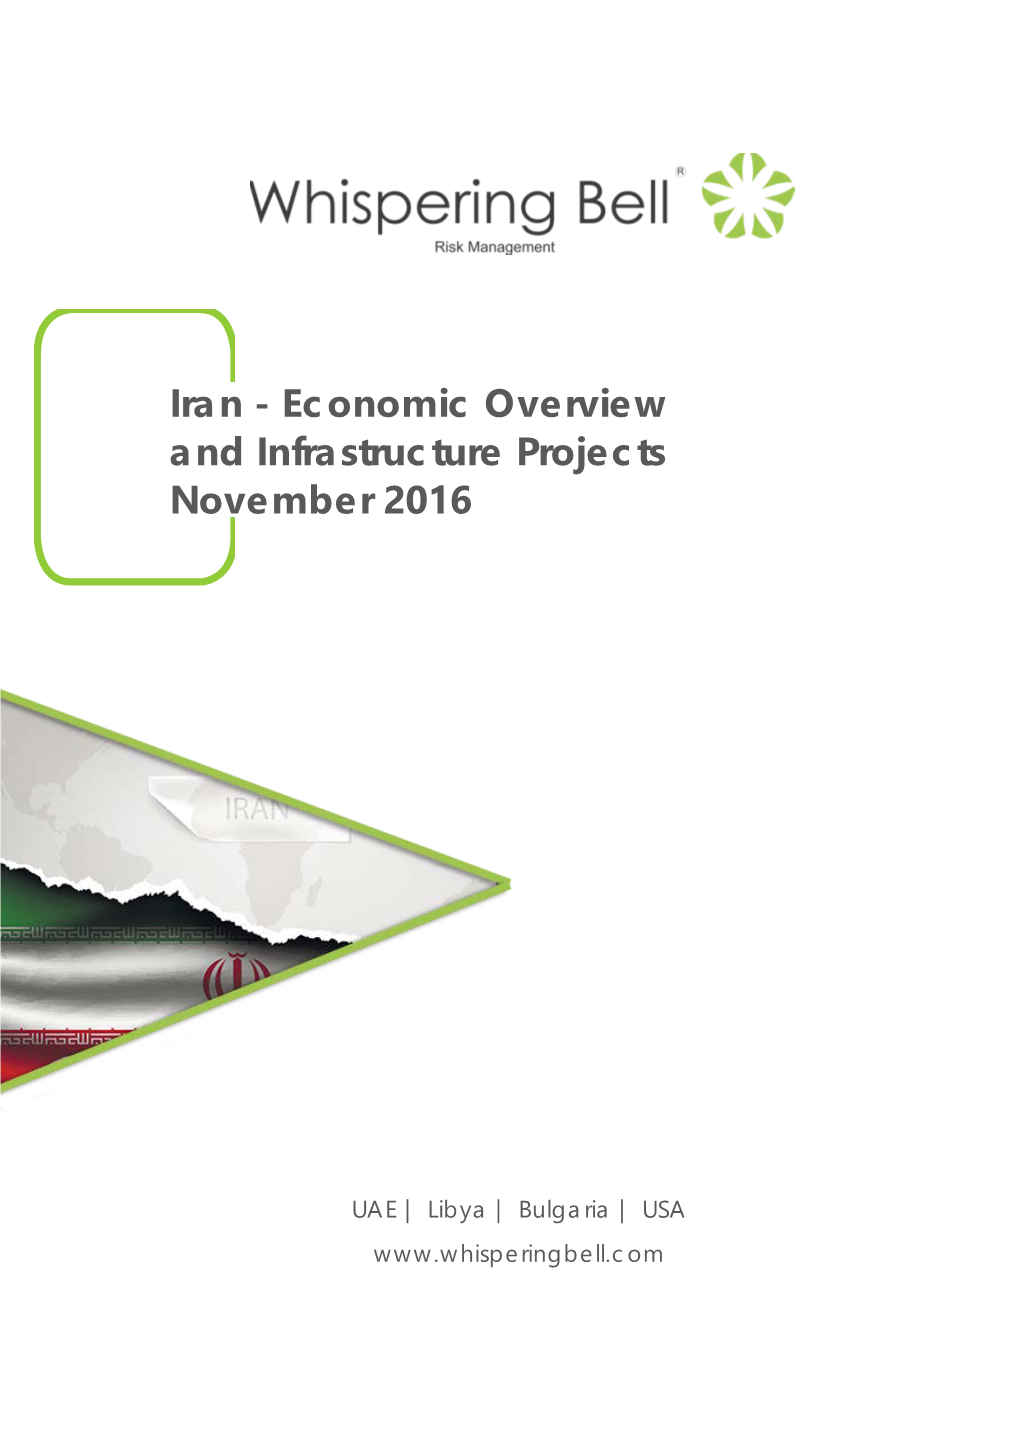 Iran - Economic Overview and Infrastructure Projects November 2016